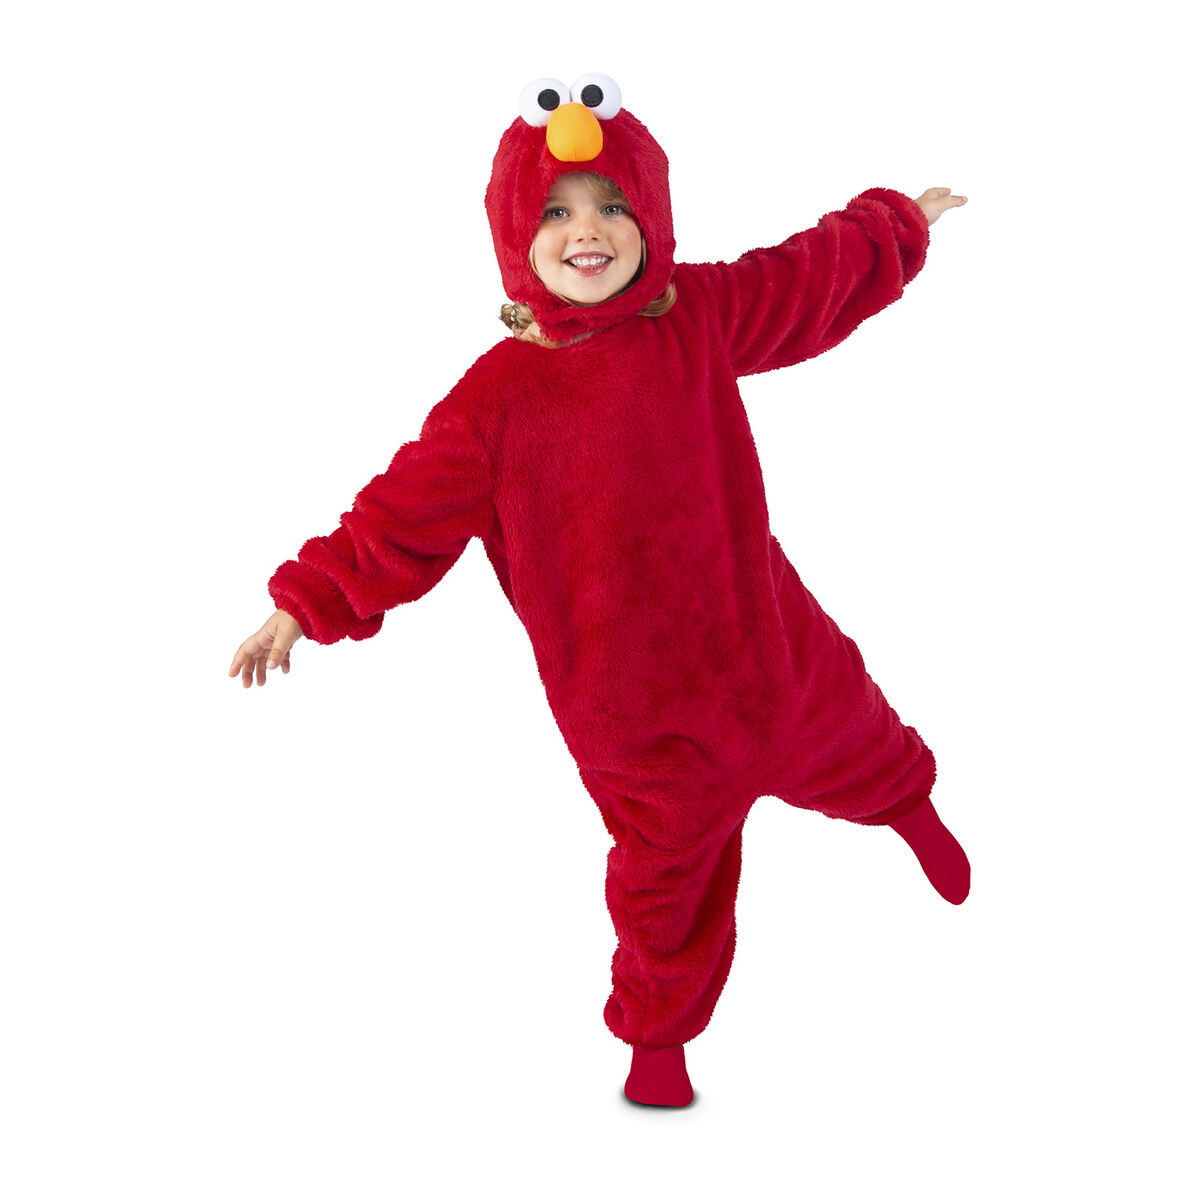 Costume for Children My Other Me Elmo Sesame Street (2 Pieces)